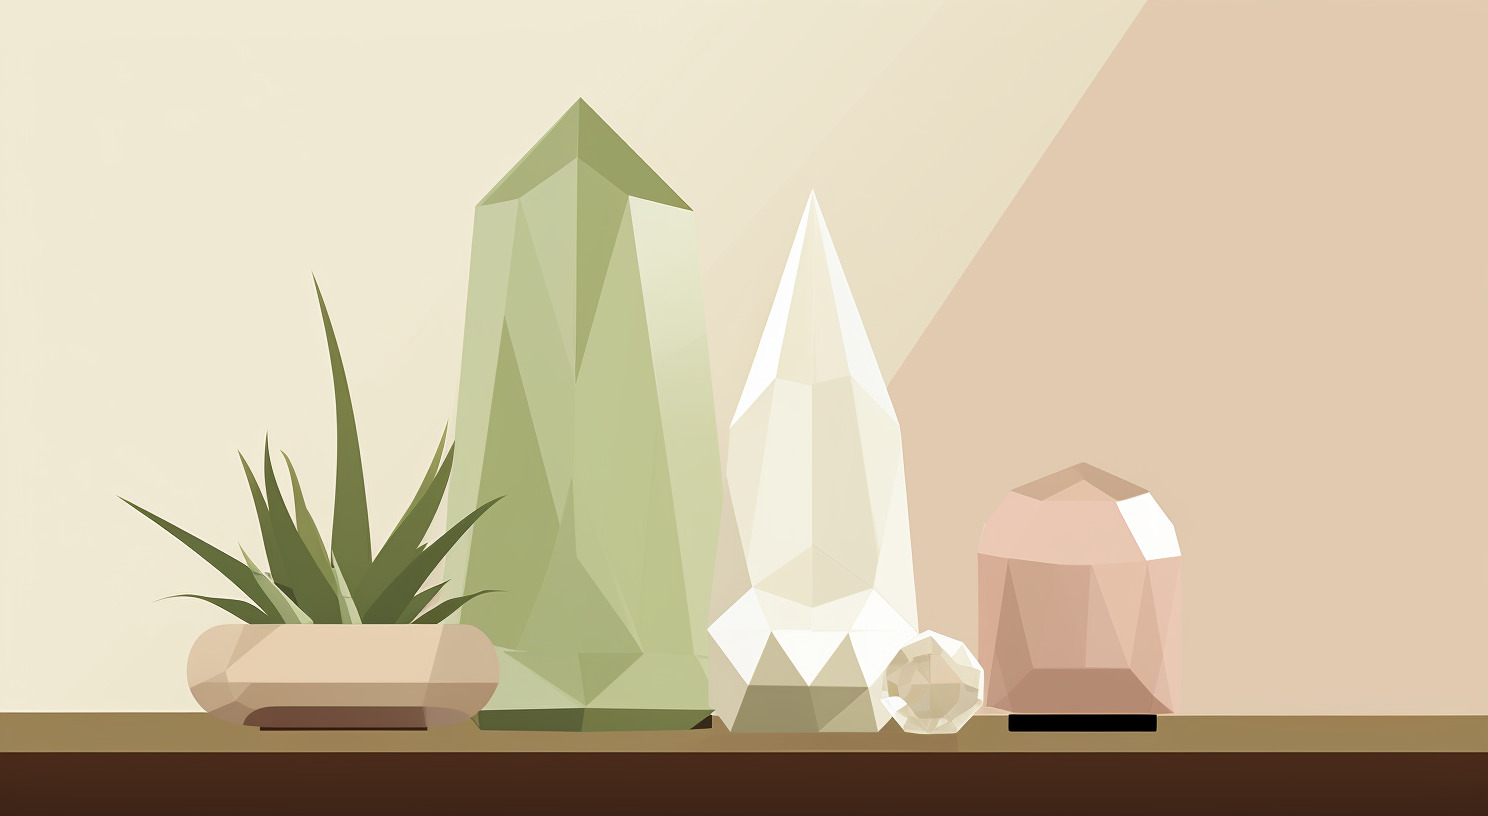 Various sized crystals sit on a table next to a plant.